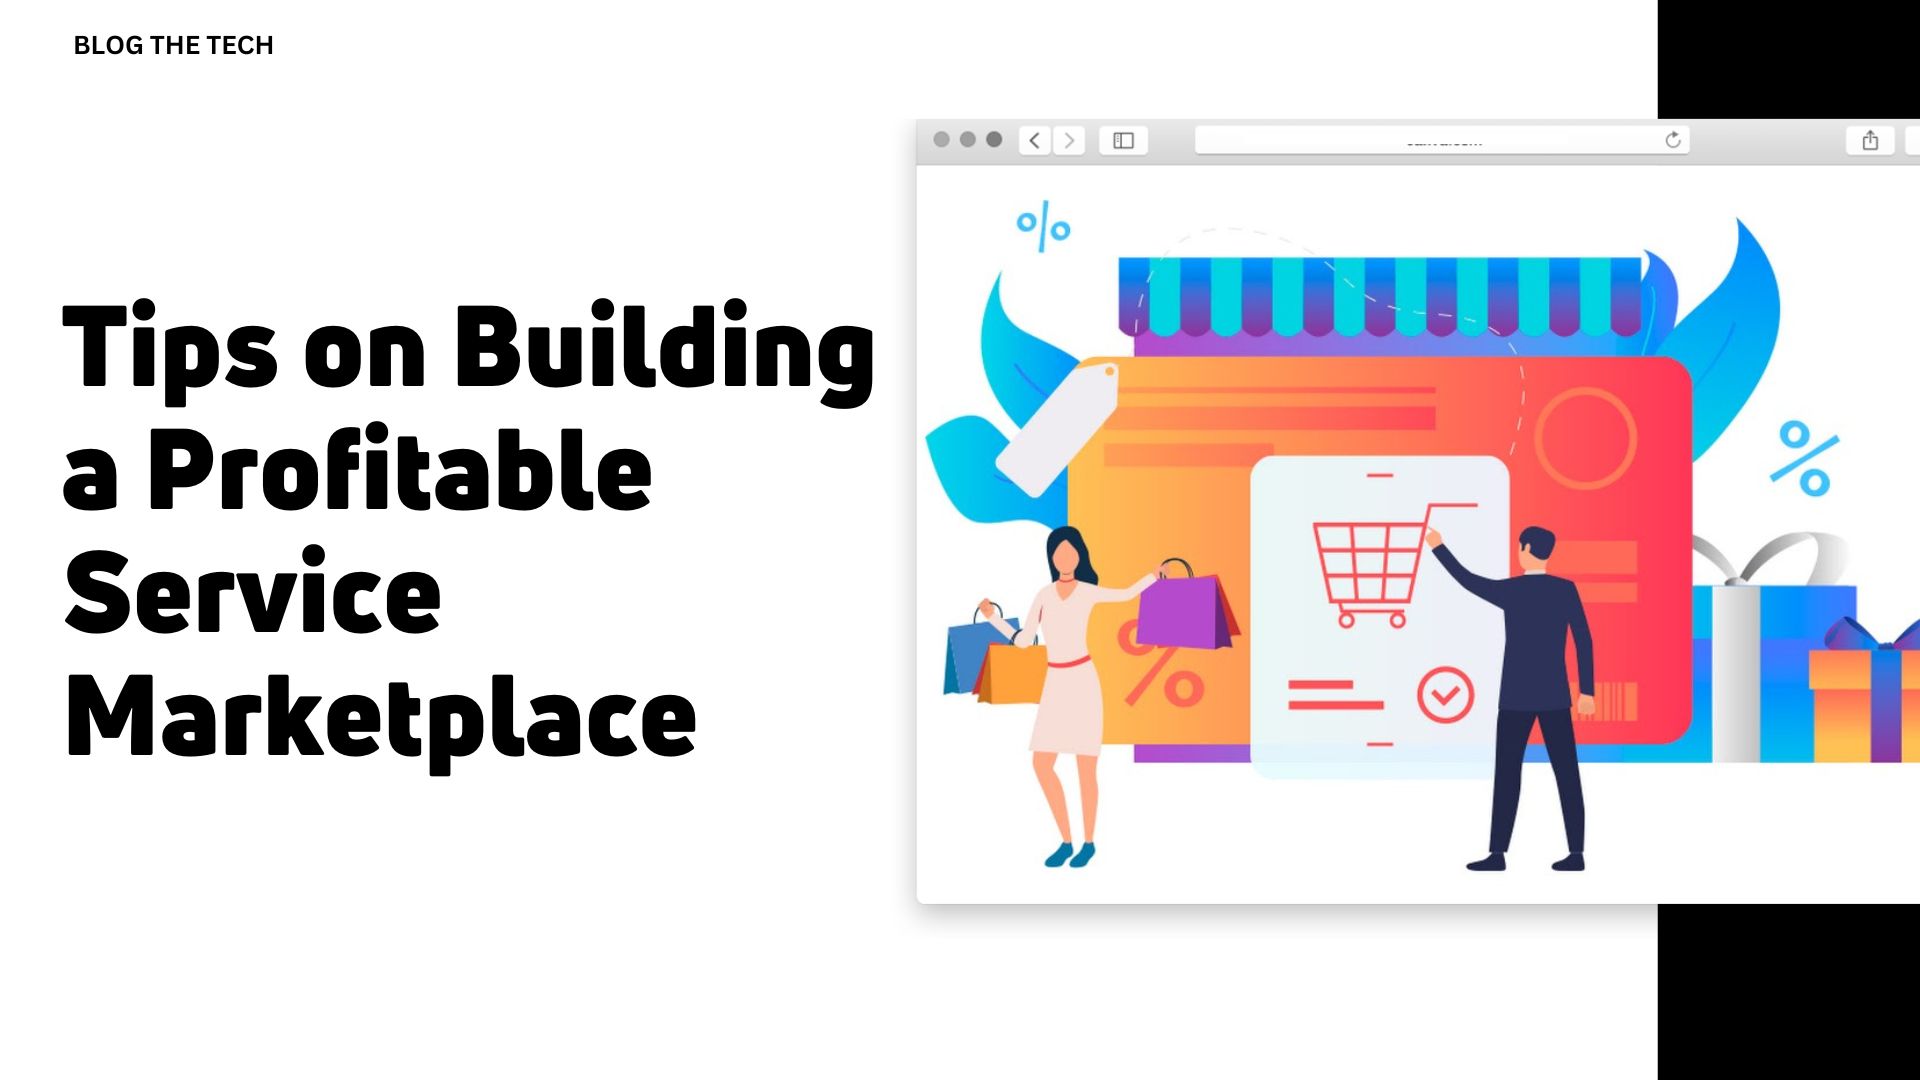 Tips on Building a Profitable Service Marketplace